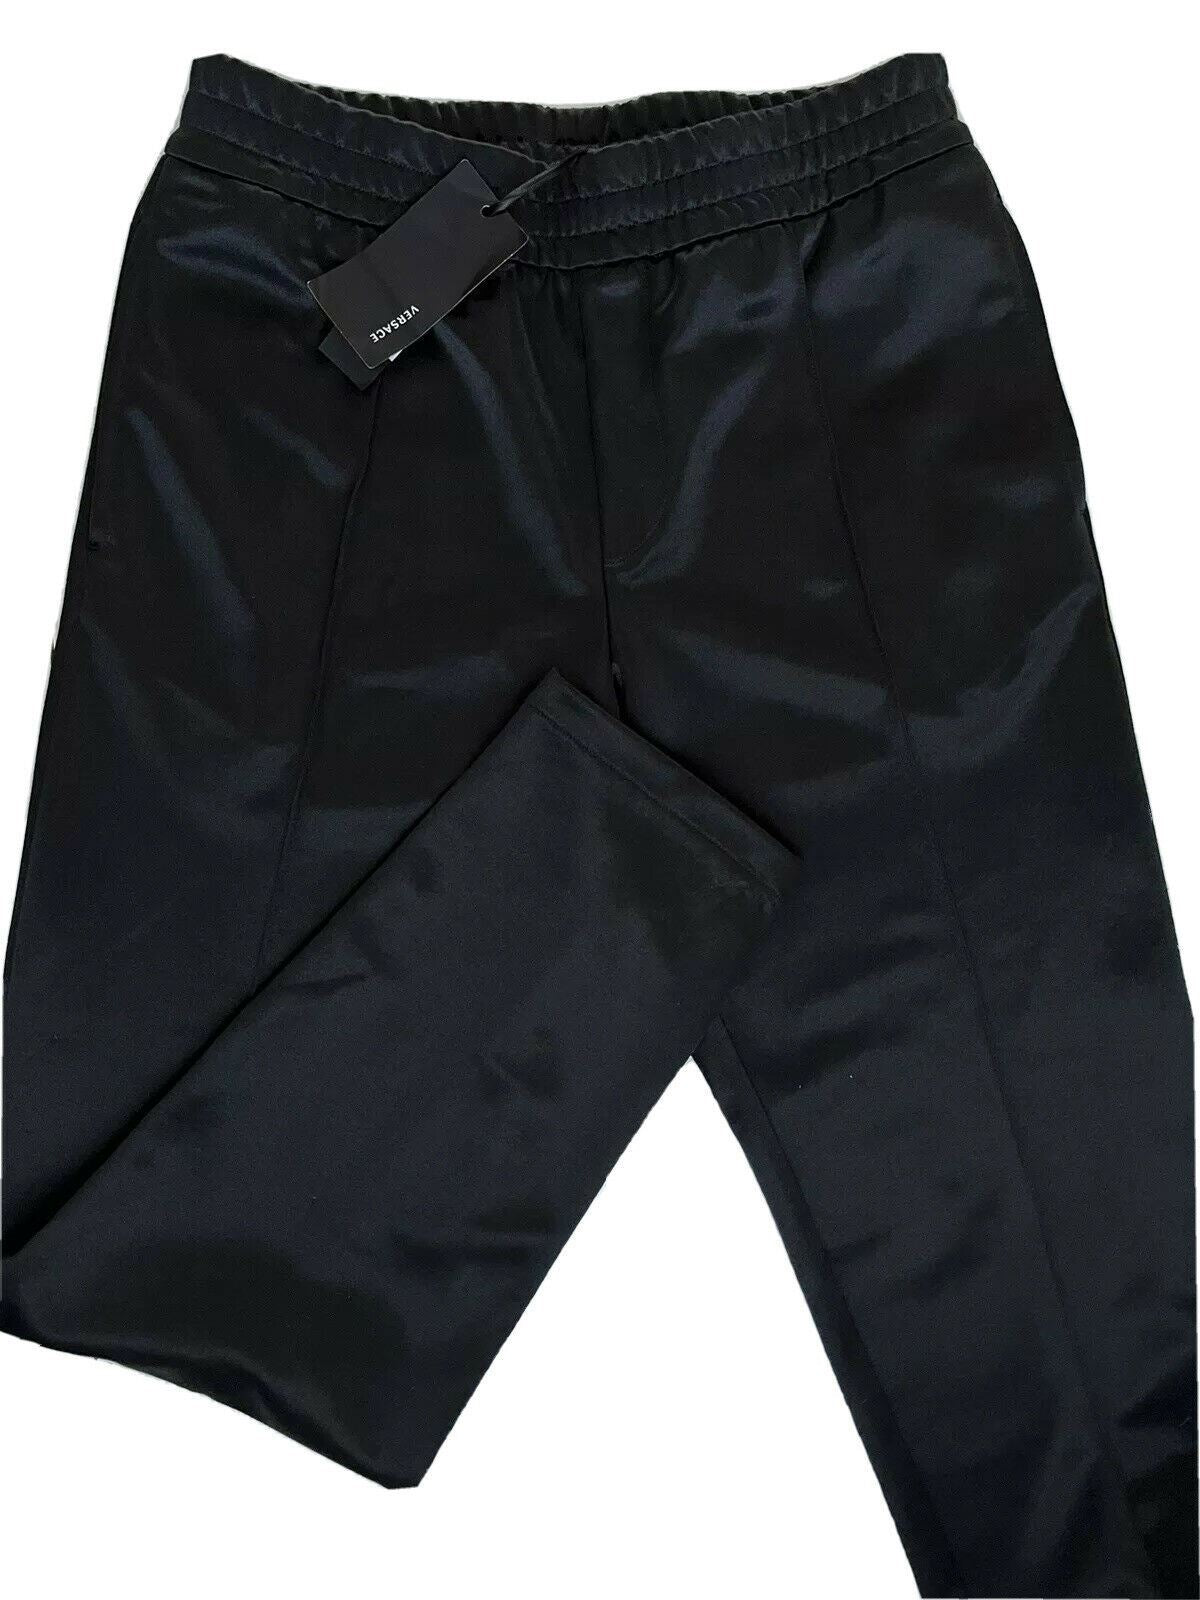 NWT $875 Versace Men's Black Tailor Fit Activewear Pants S Made in Italy A88117